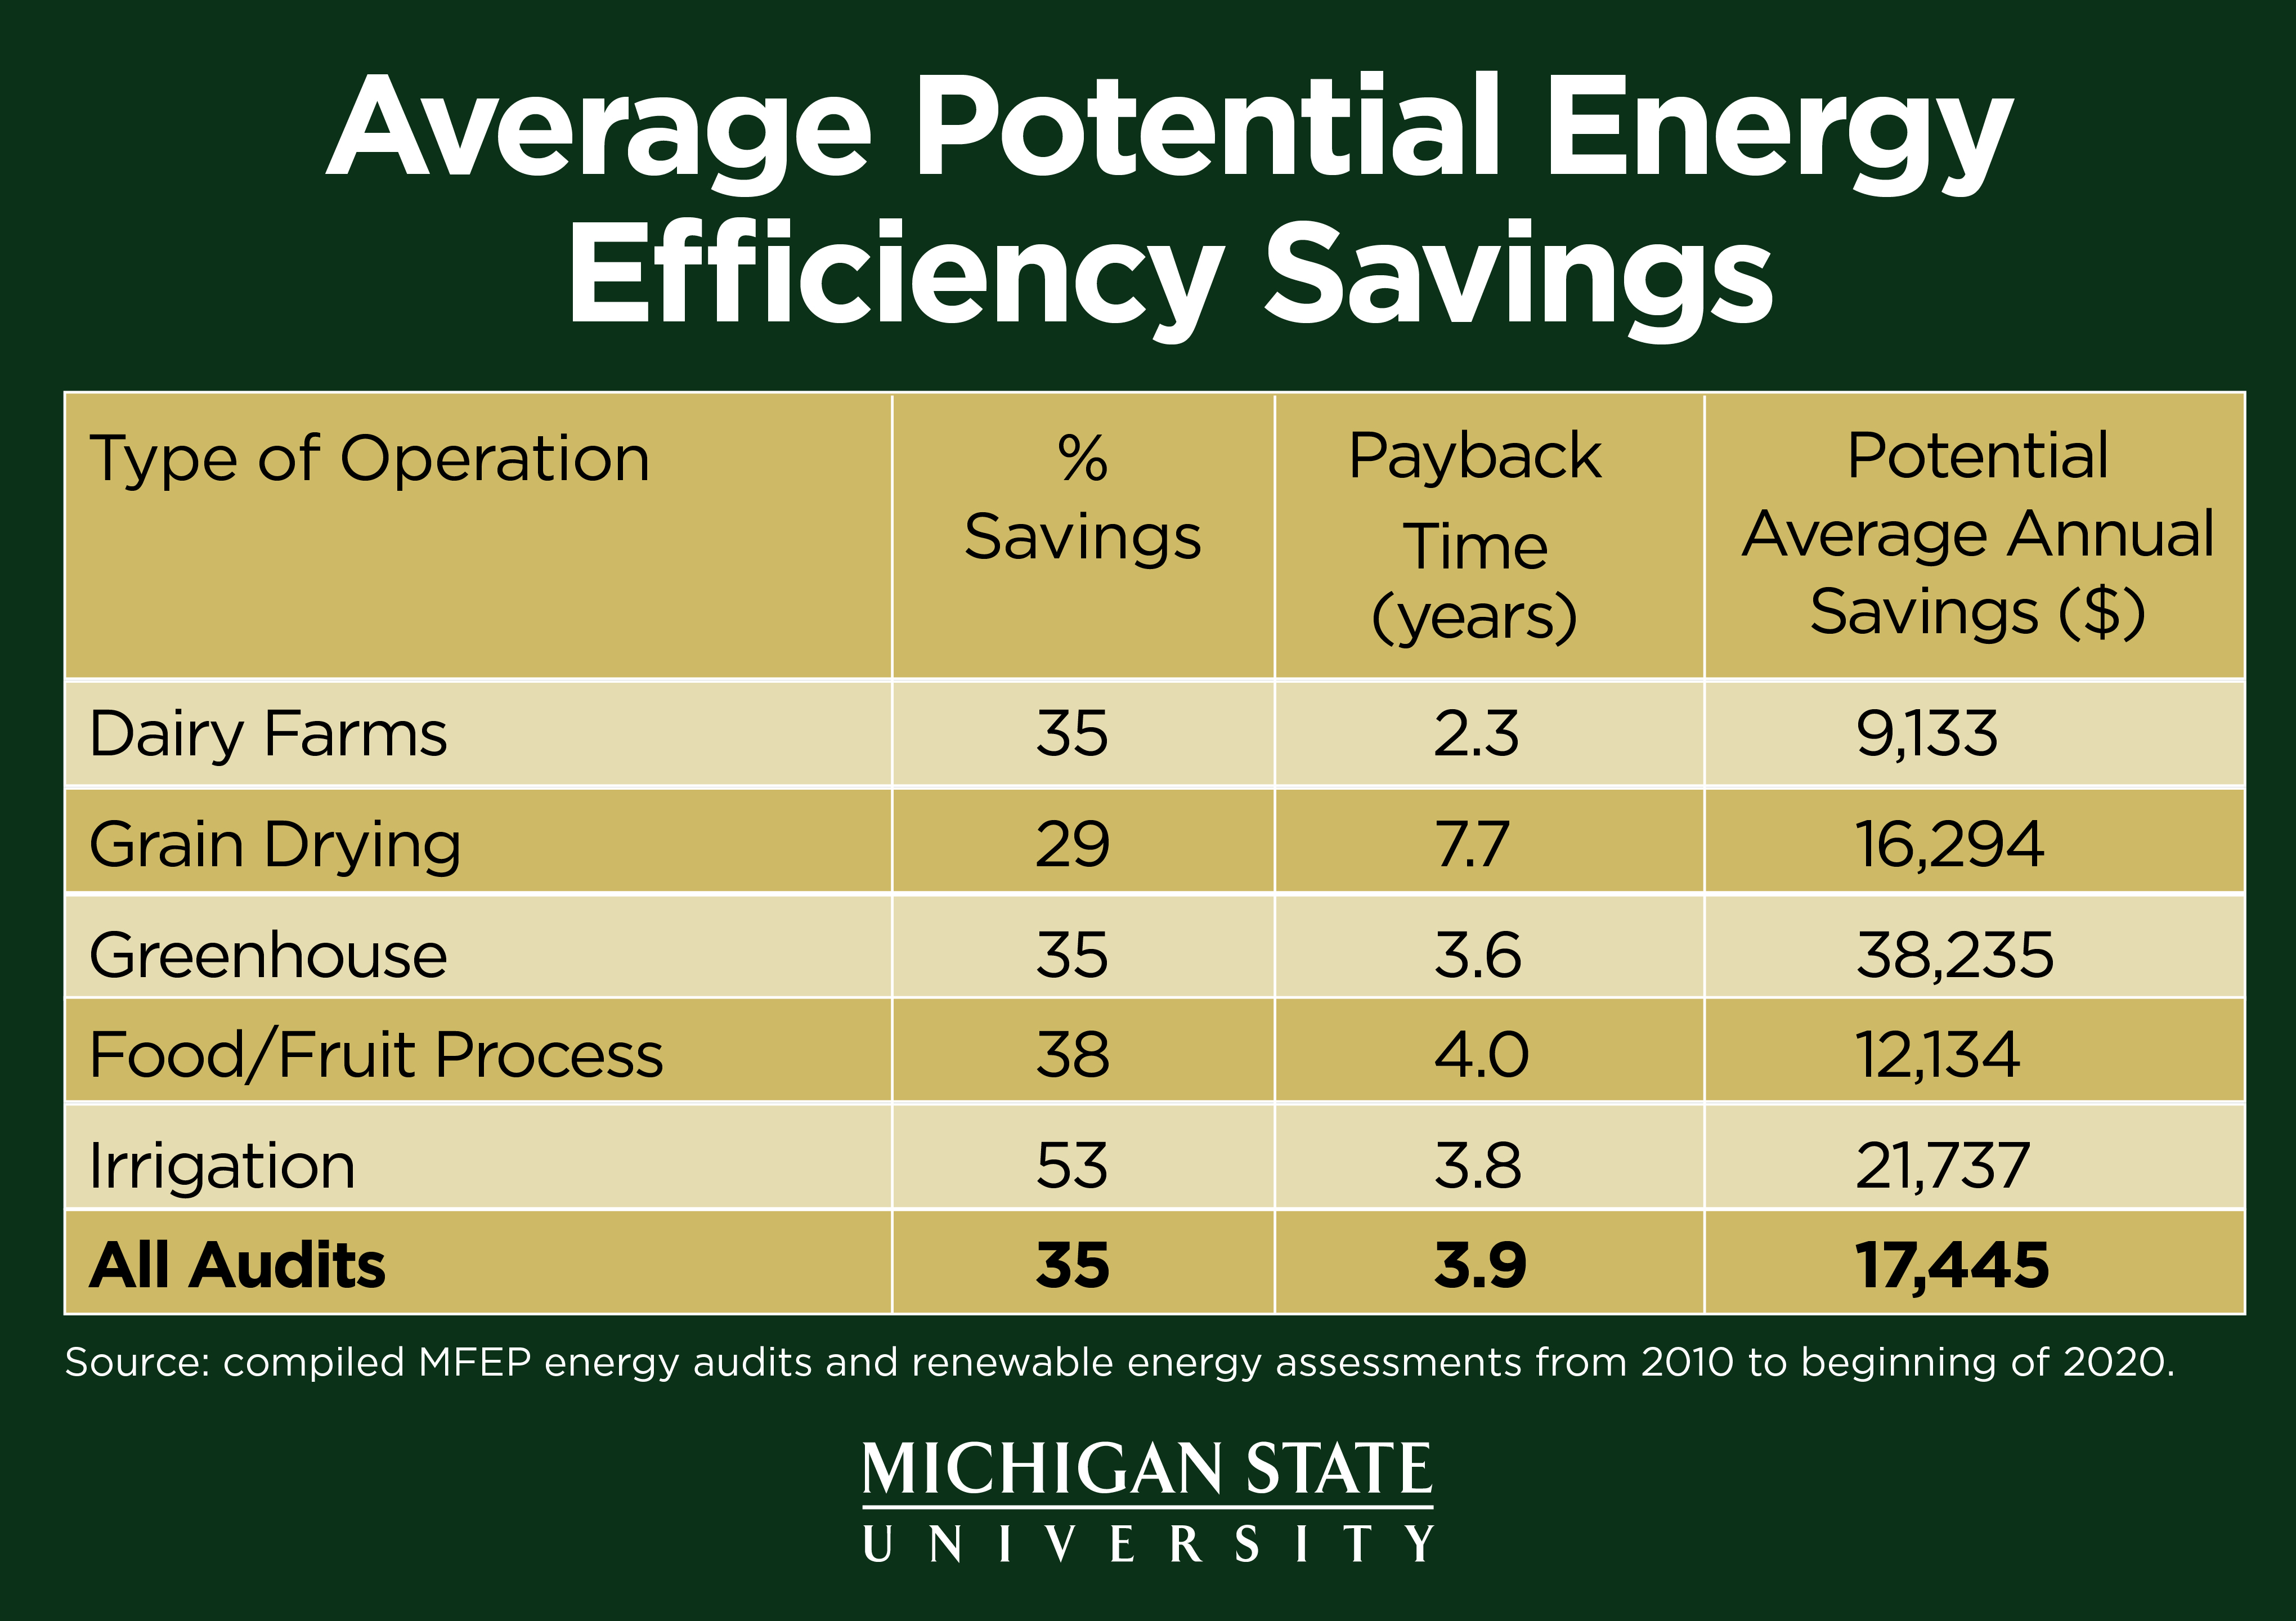 Table of Average Potential Energy Savings for Michigan Farms